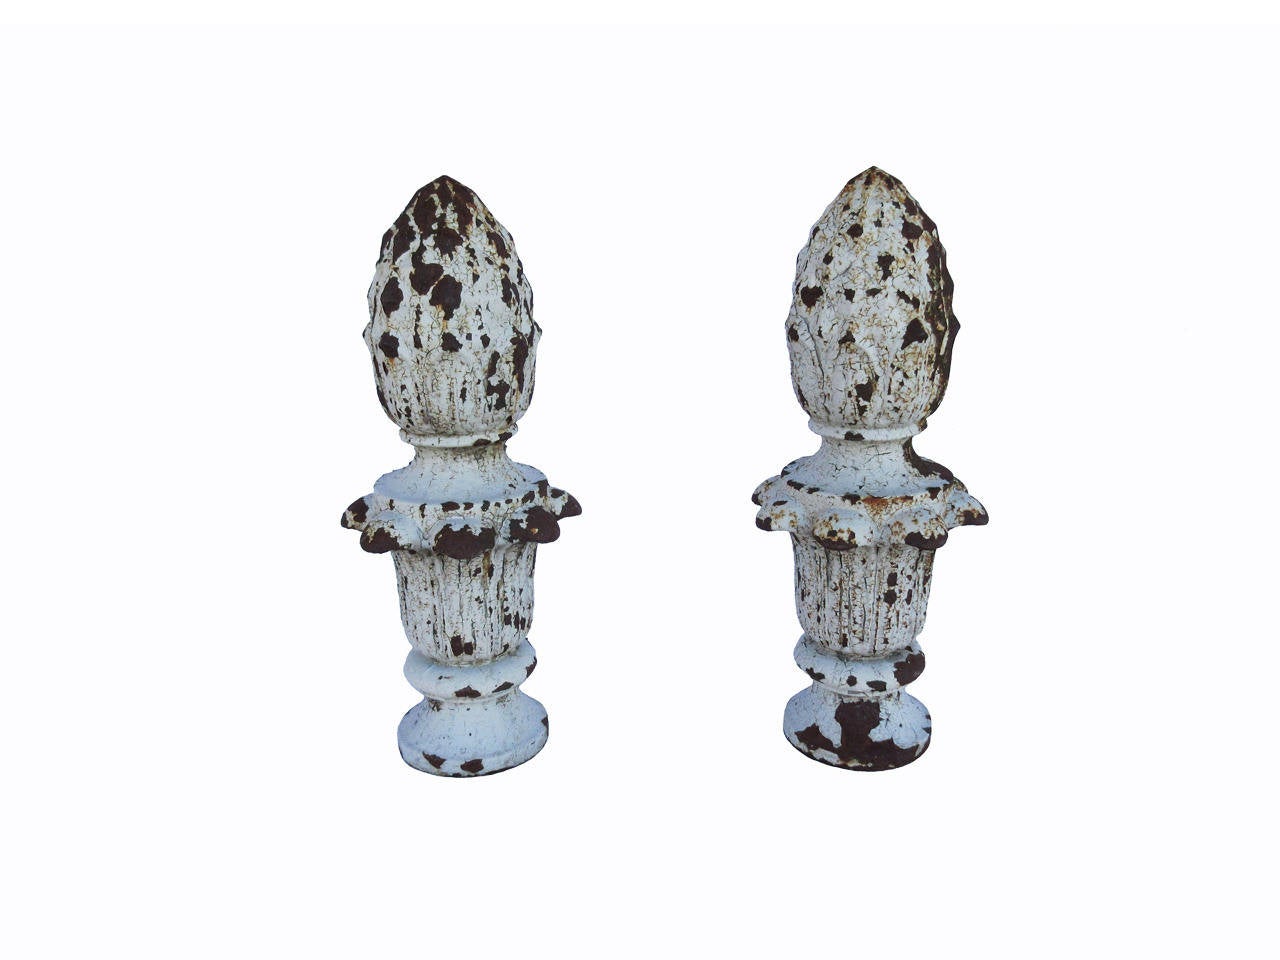 Late 19th century pair large-scale cast iron finials with pineapple and leaf motif, great detailing, thick white age cracked painted surface, excellent condition.